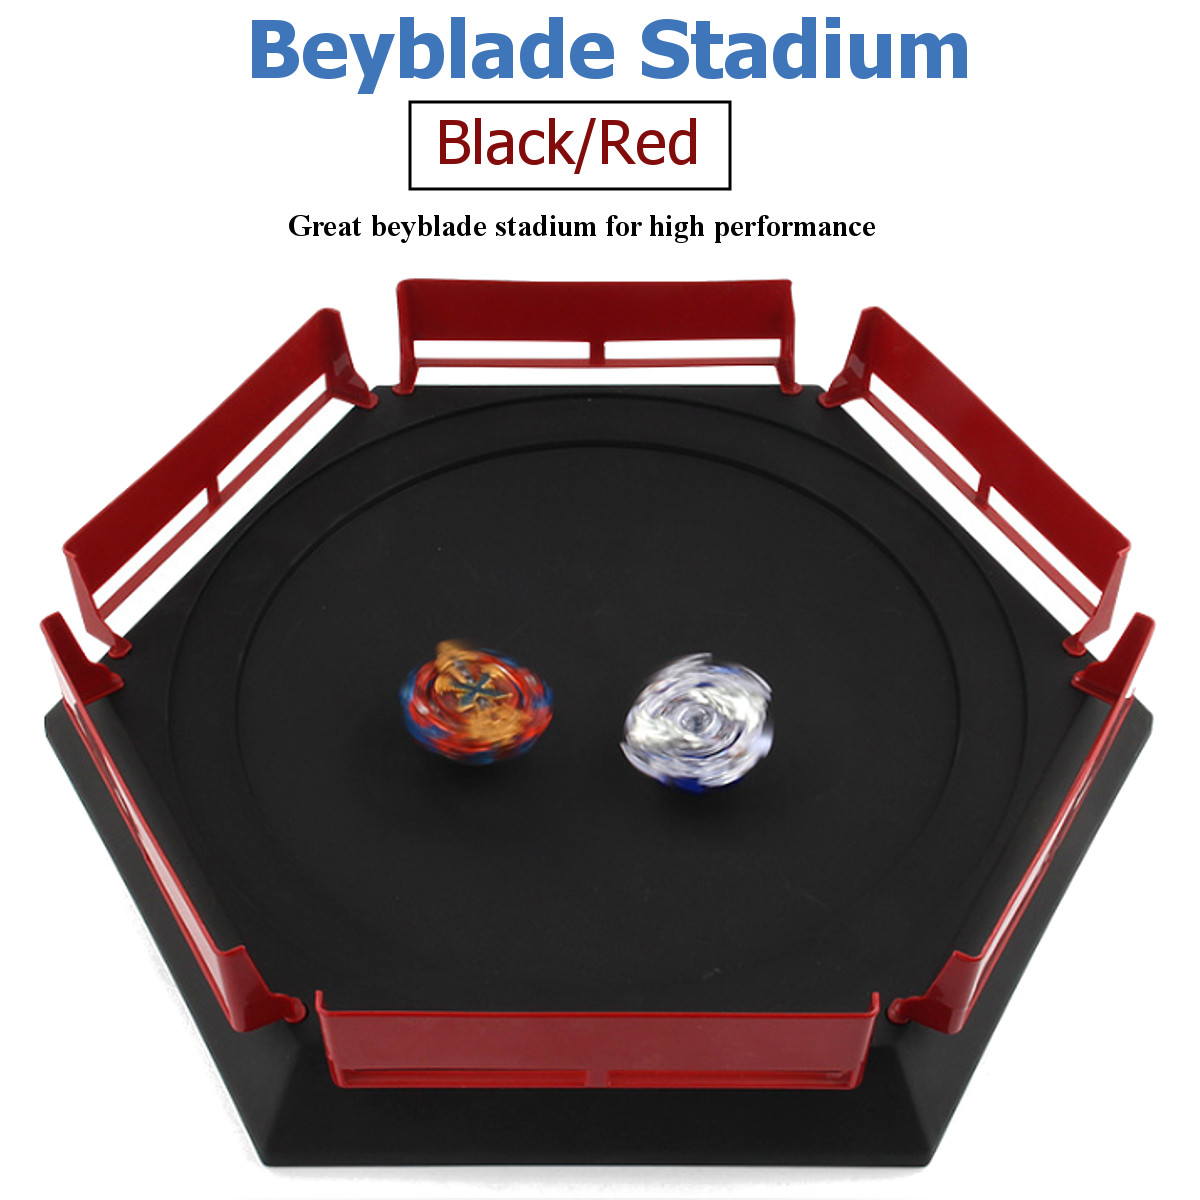 Burst-Gyro-Arena-Disk-Vovomay-Exciting-Duel-Spinning-Top-Beyblades-Launcher-Stadium-1390439-2